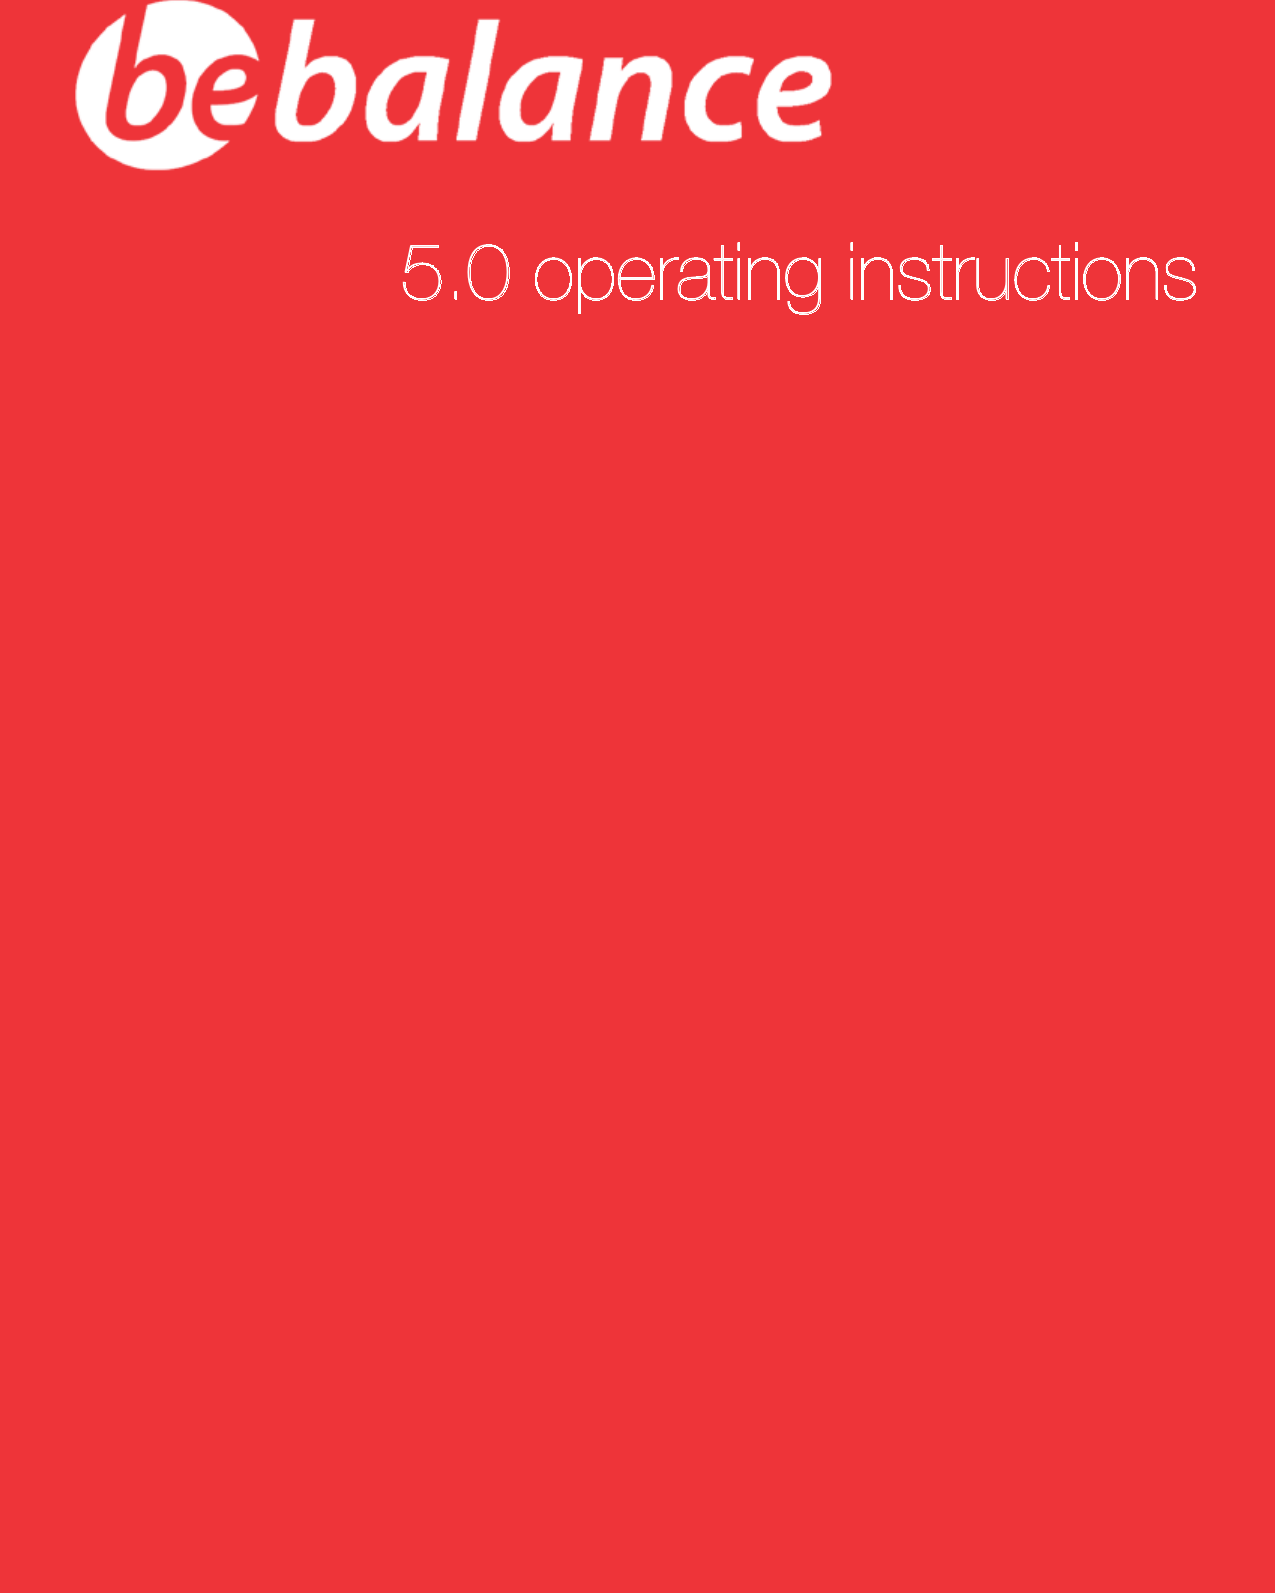 365.0 operating instructions